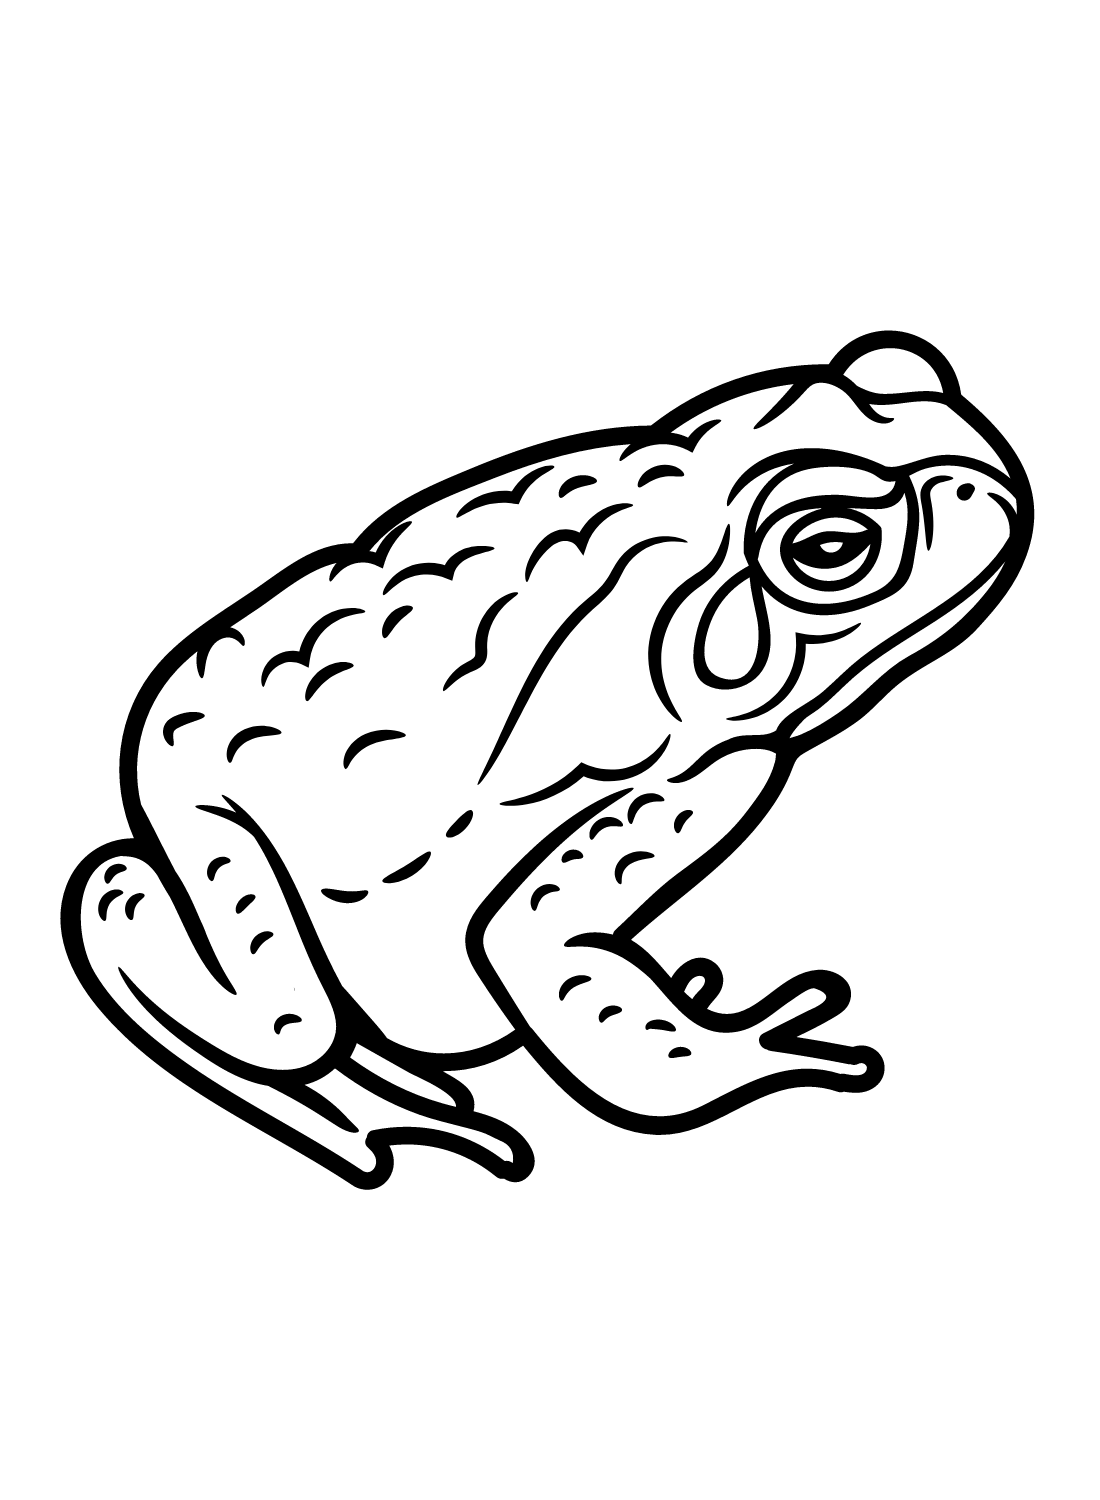 Toad Images Coloring Page - Free Printable Coloring Pages